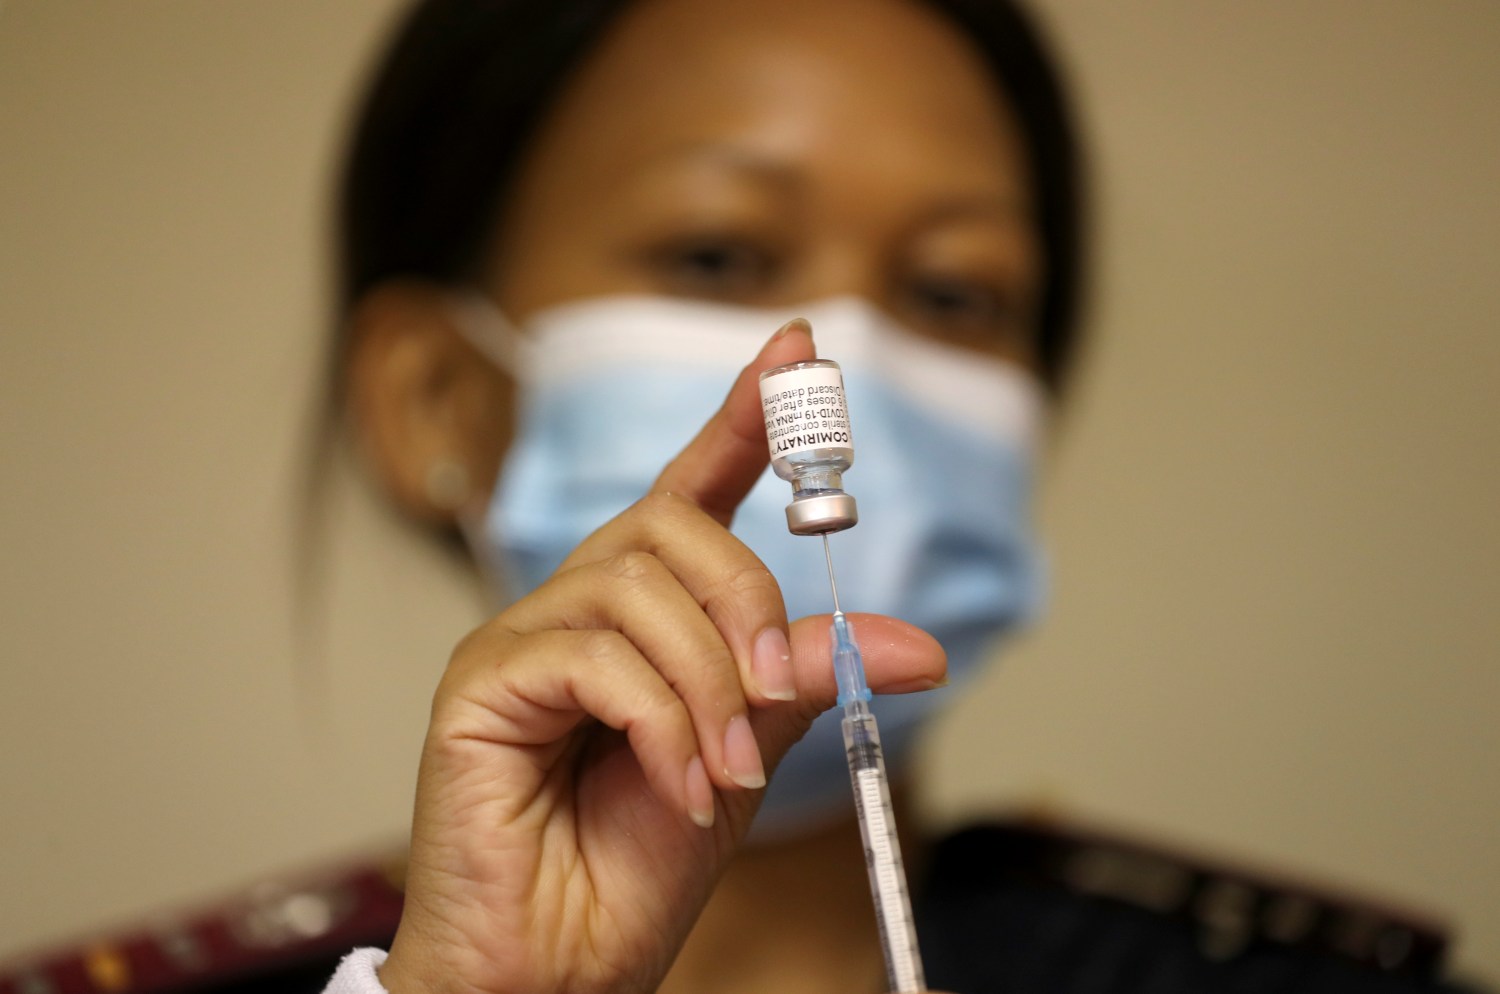 A health worker holds a vial of the Pfizer/BioNTech coronavirus disease (COVID-19) vaccine, at the Munsieville Care for the Aged Centre outside Johannesburg, South Africa May 17, 2021. REUTERS/Siphiwe Sibeko